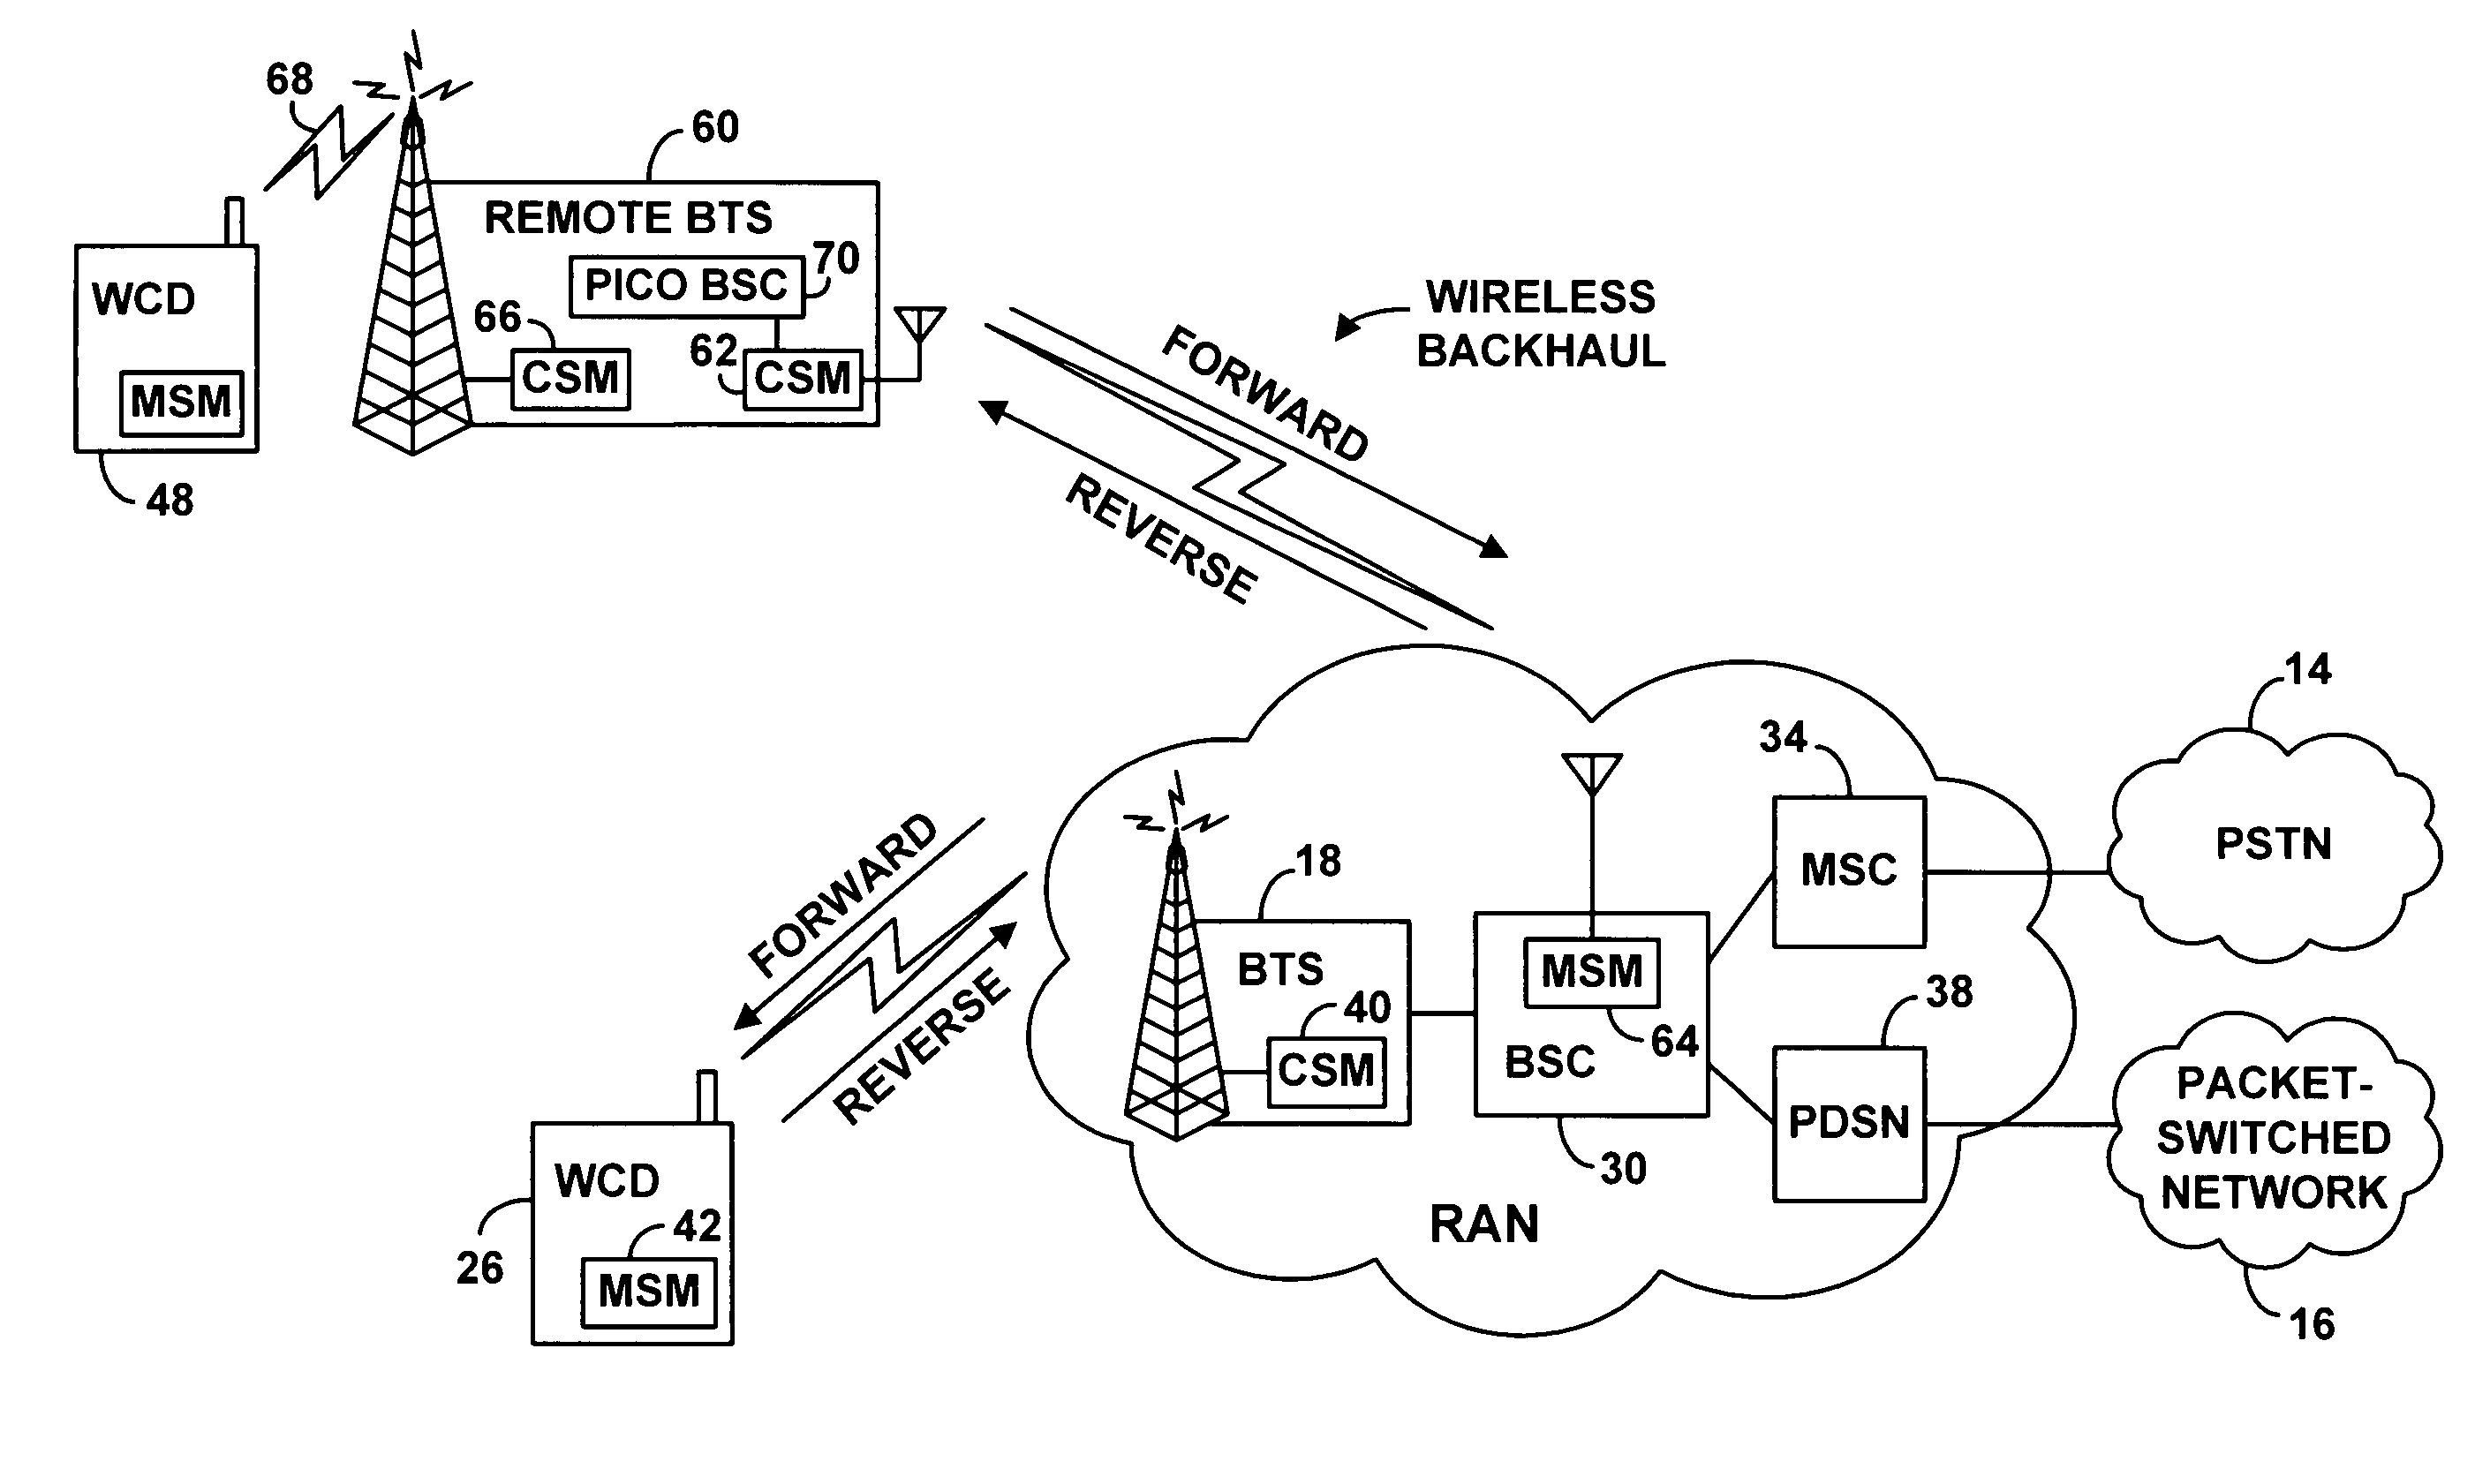 Method and system for wireless backhaul communication between a radio access network and a remote base station